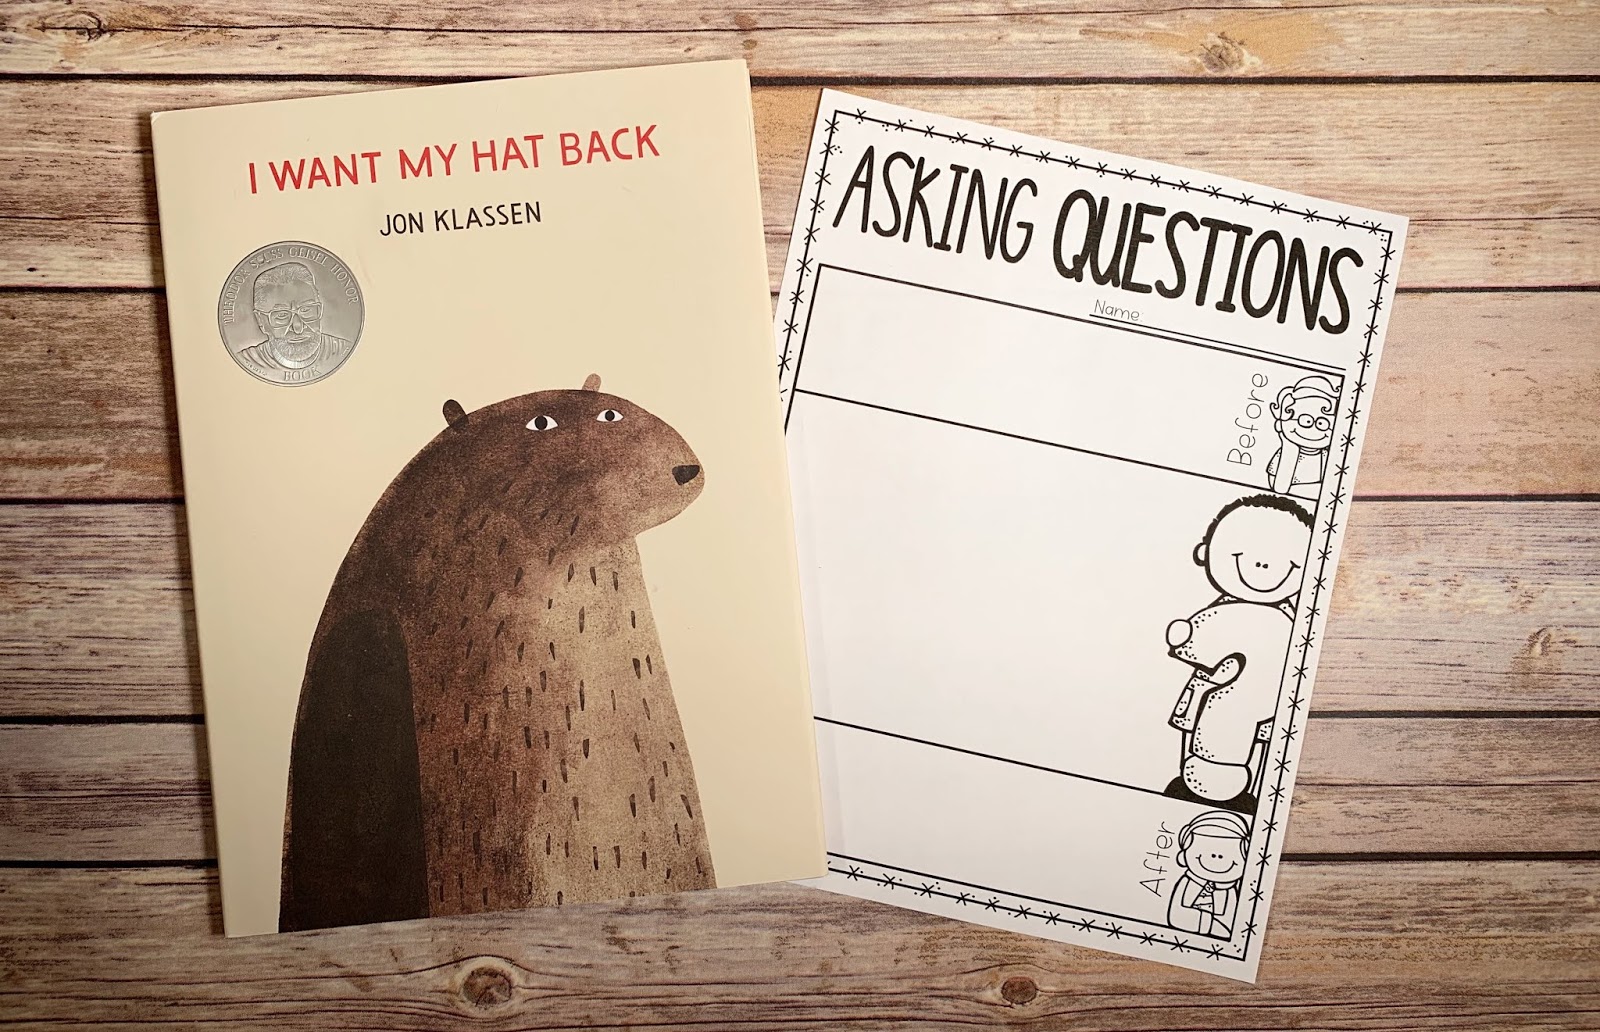 Mentor text with text "I Want My Hat Back" and graphic organizer with text "Asking Questions" 